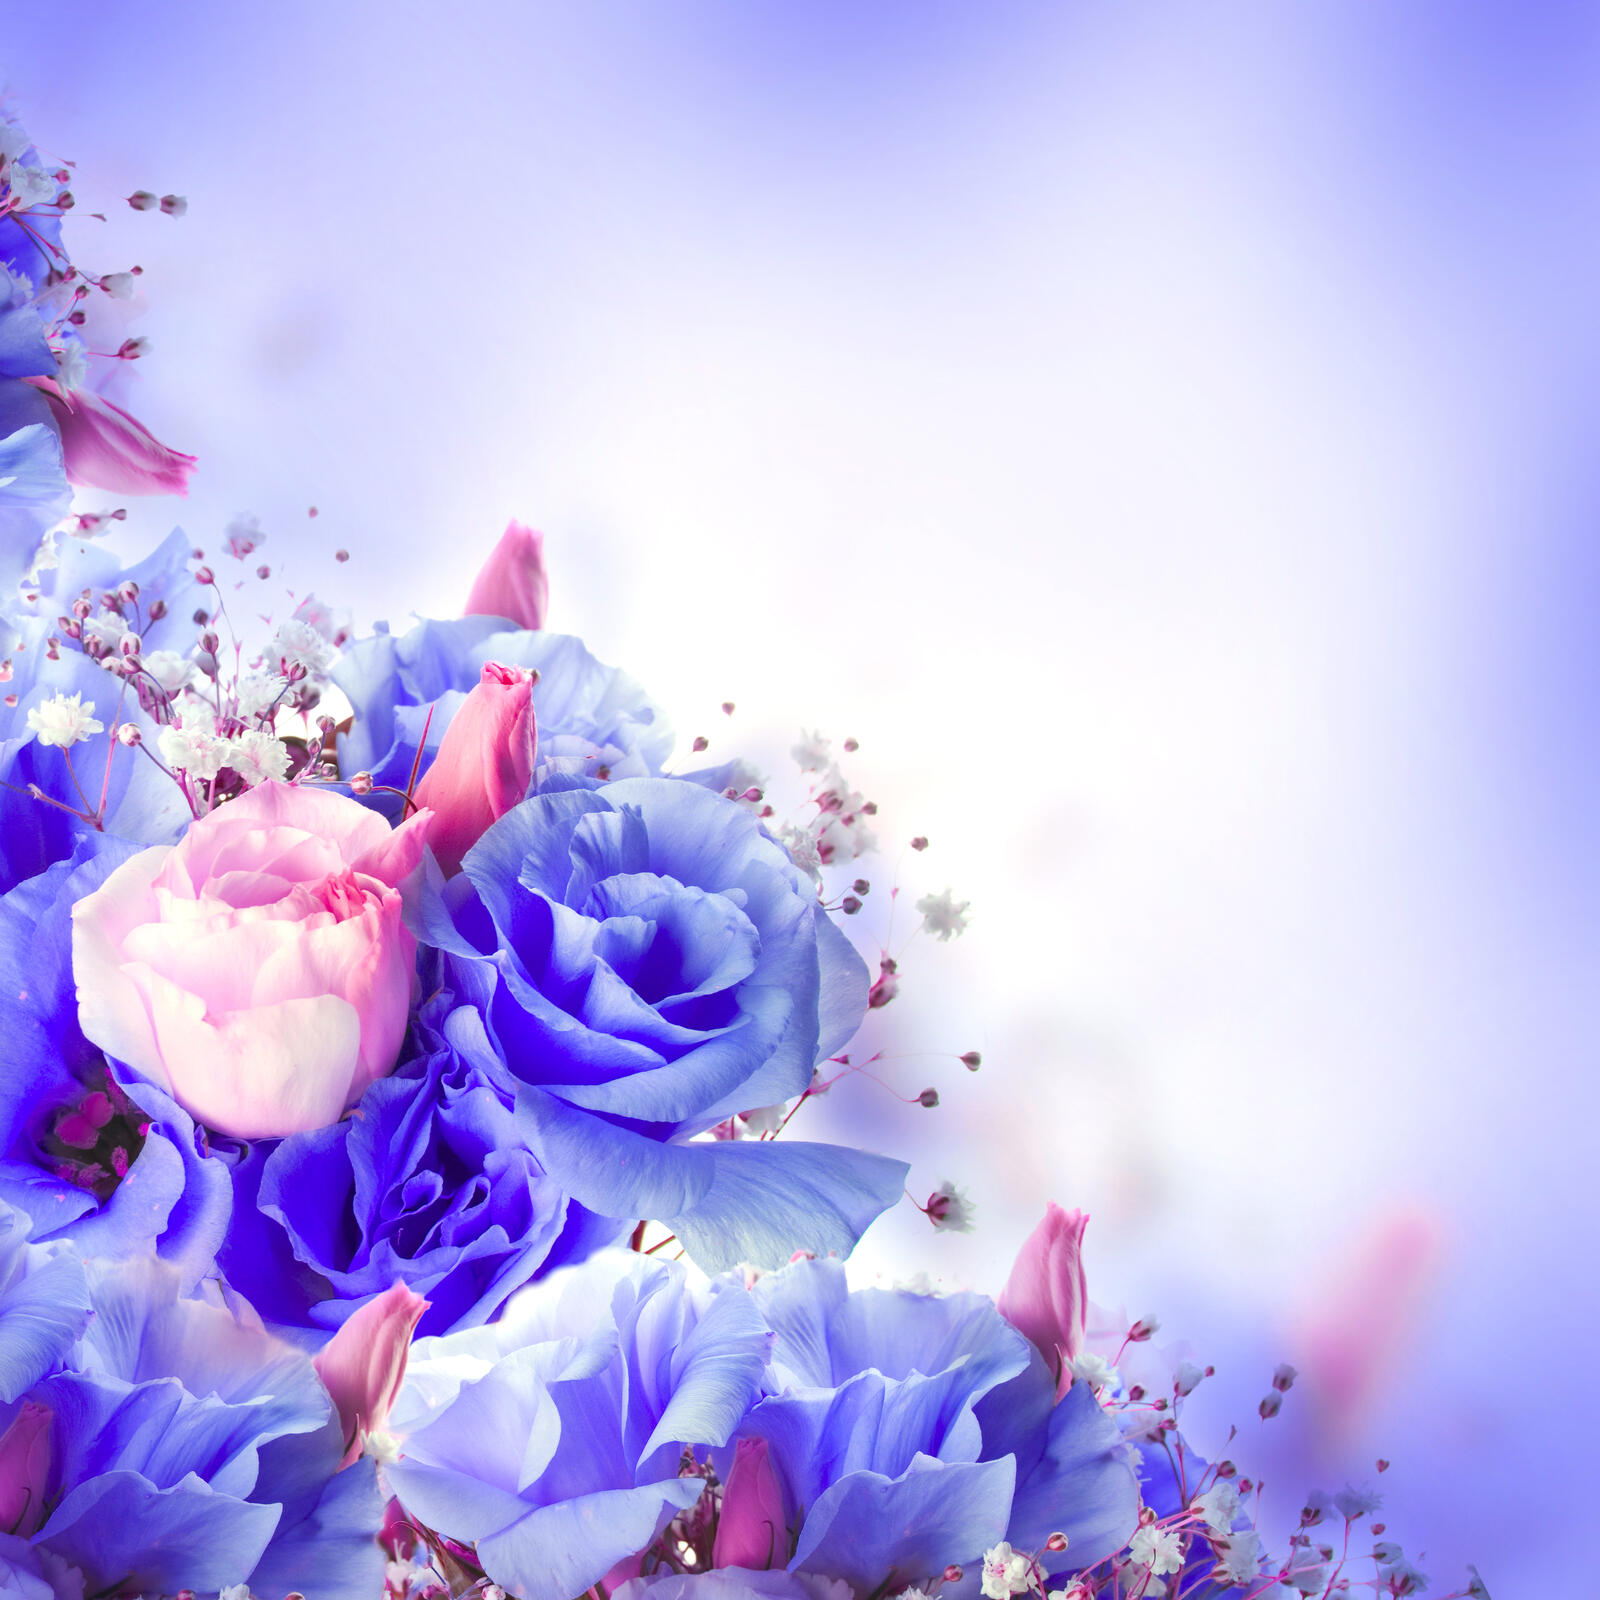 Free photo Picture with blue roses